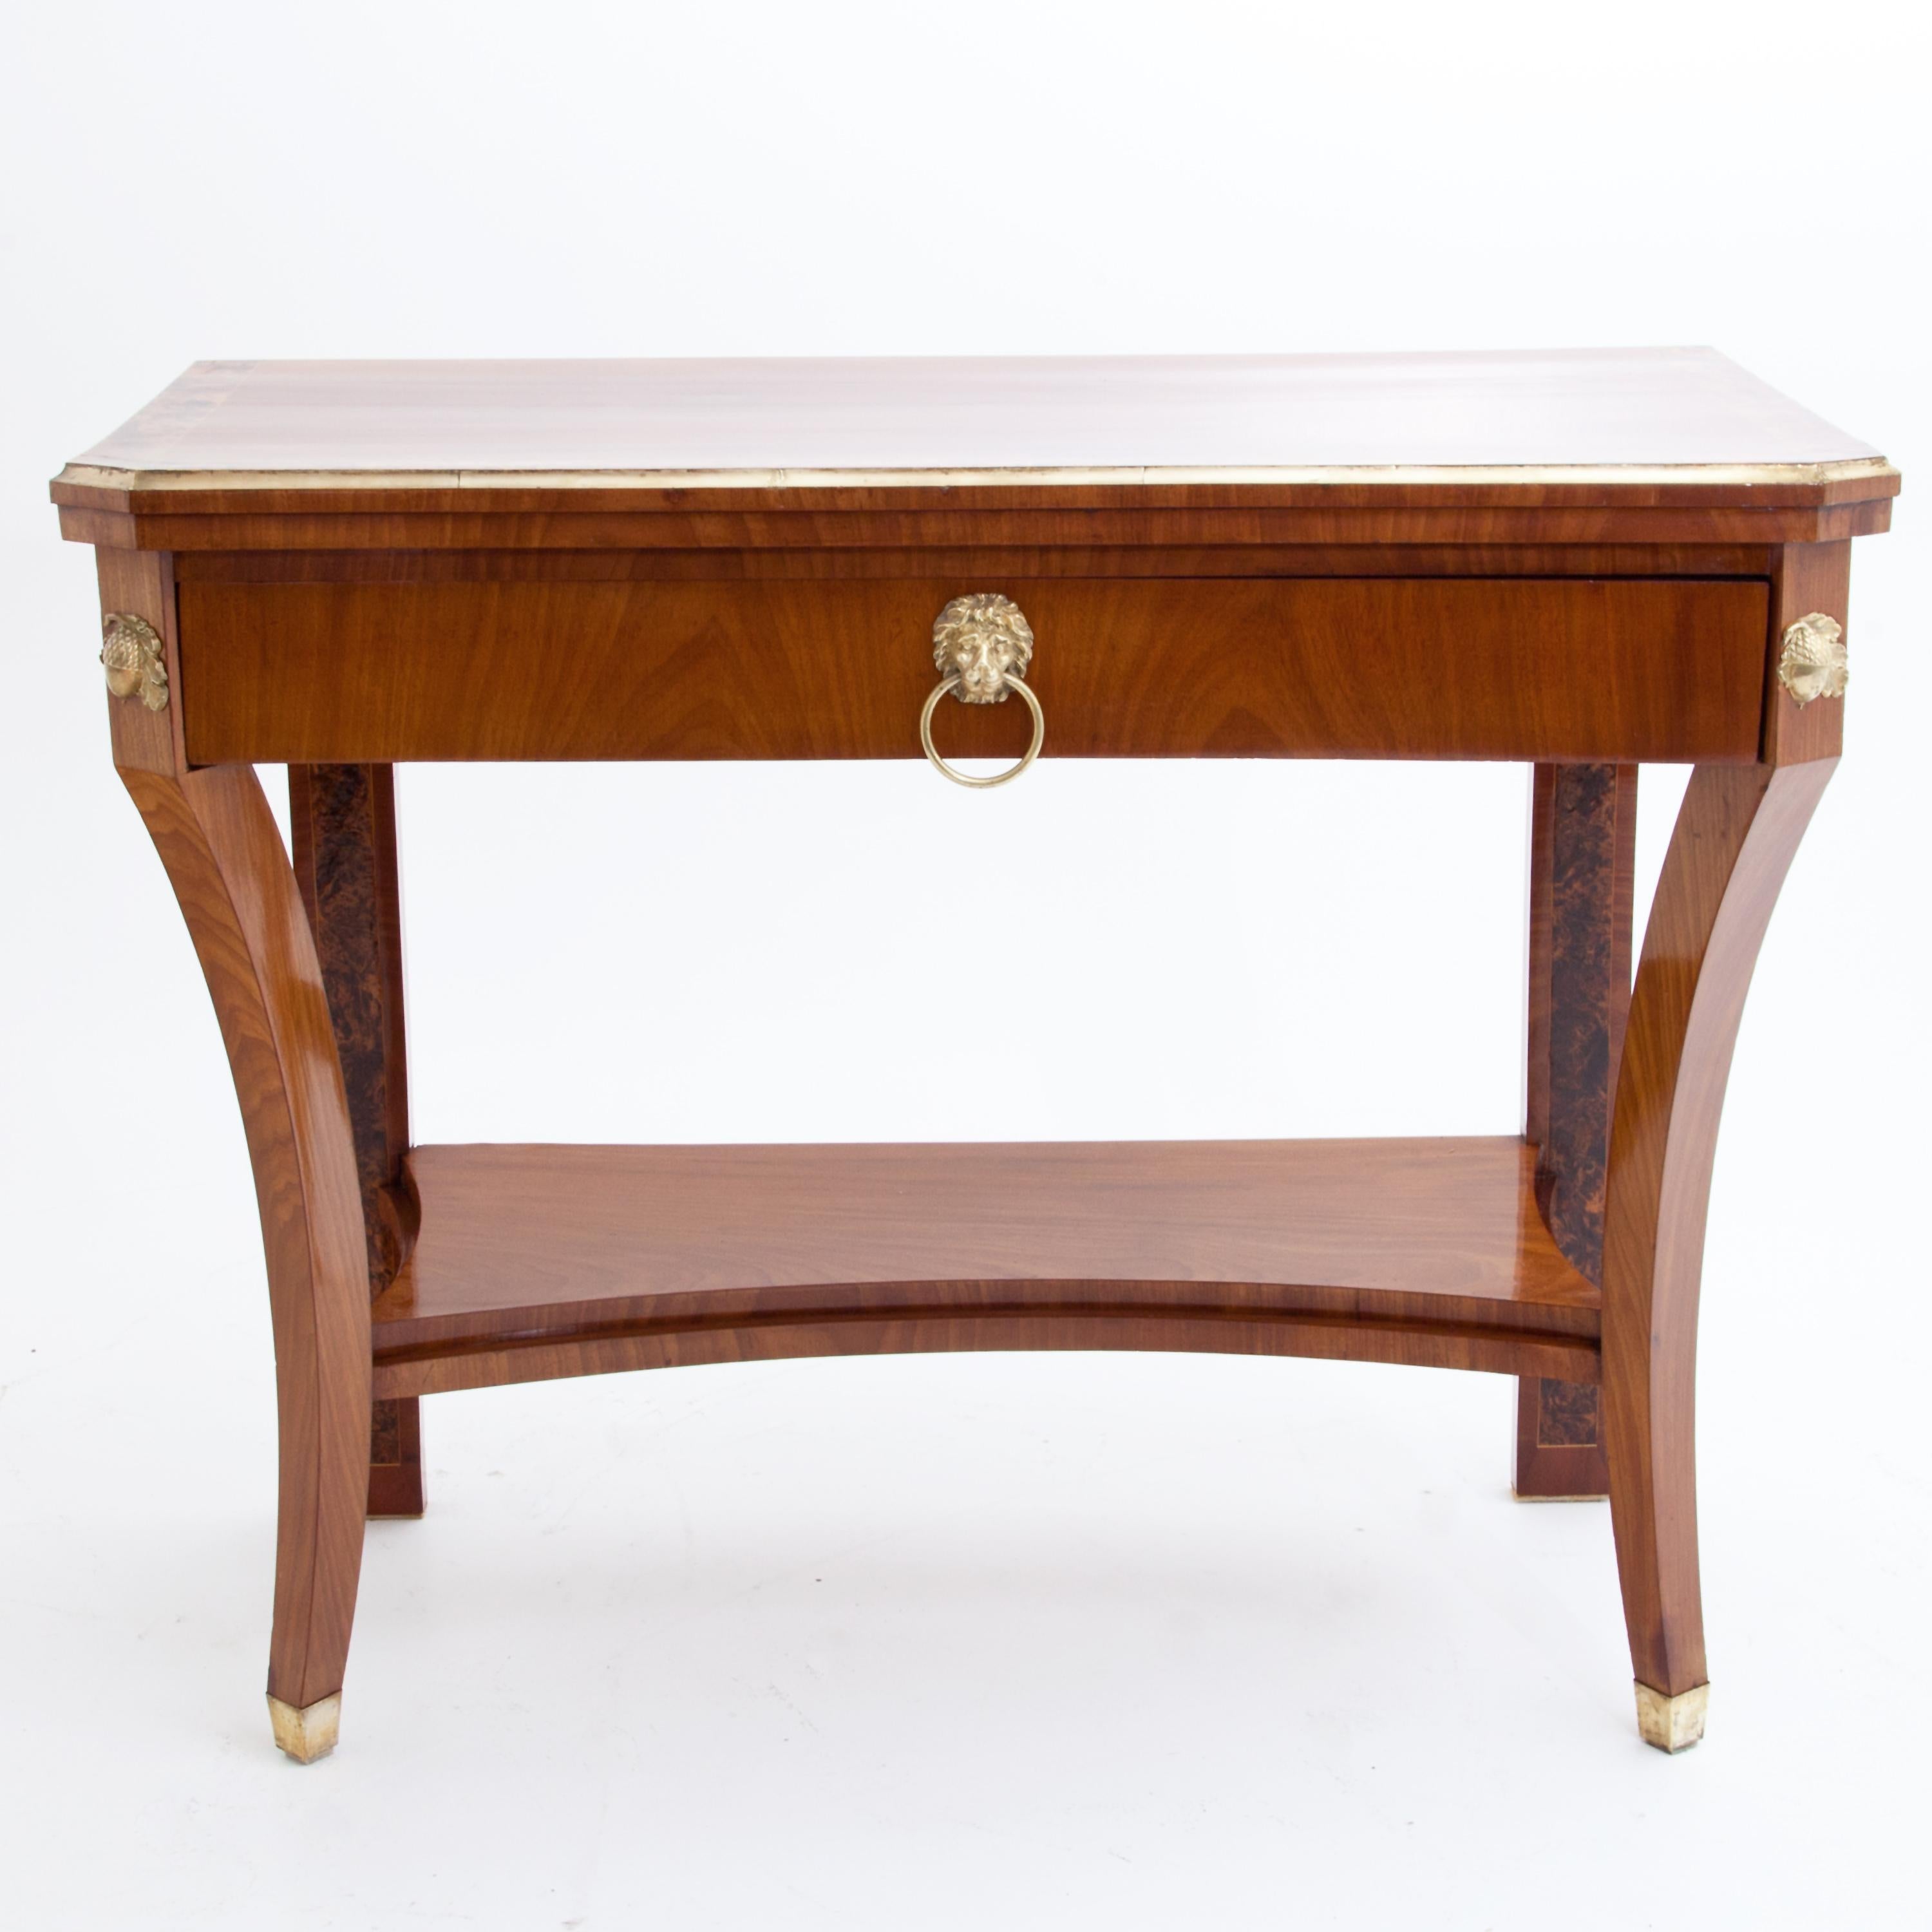 Cherrywood console table on curved square legs with brass sabots, with a drawer under the profiled top with brass band. The rear supports and the edge of the tabletop are inlaid in burl wood. At the corners there are brass fittings in the form of